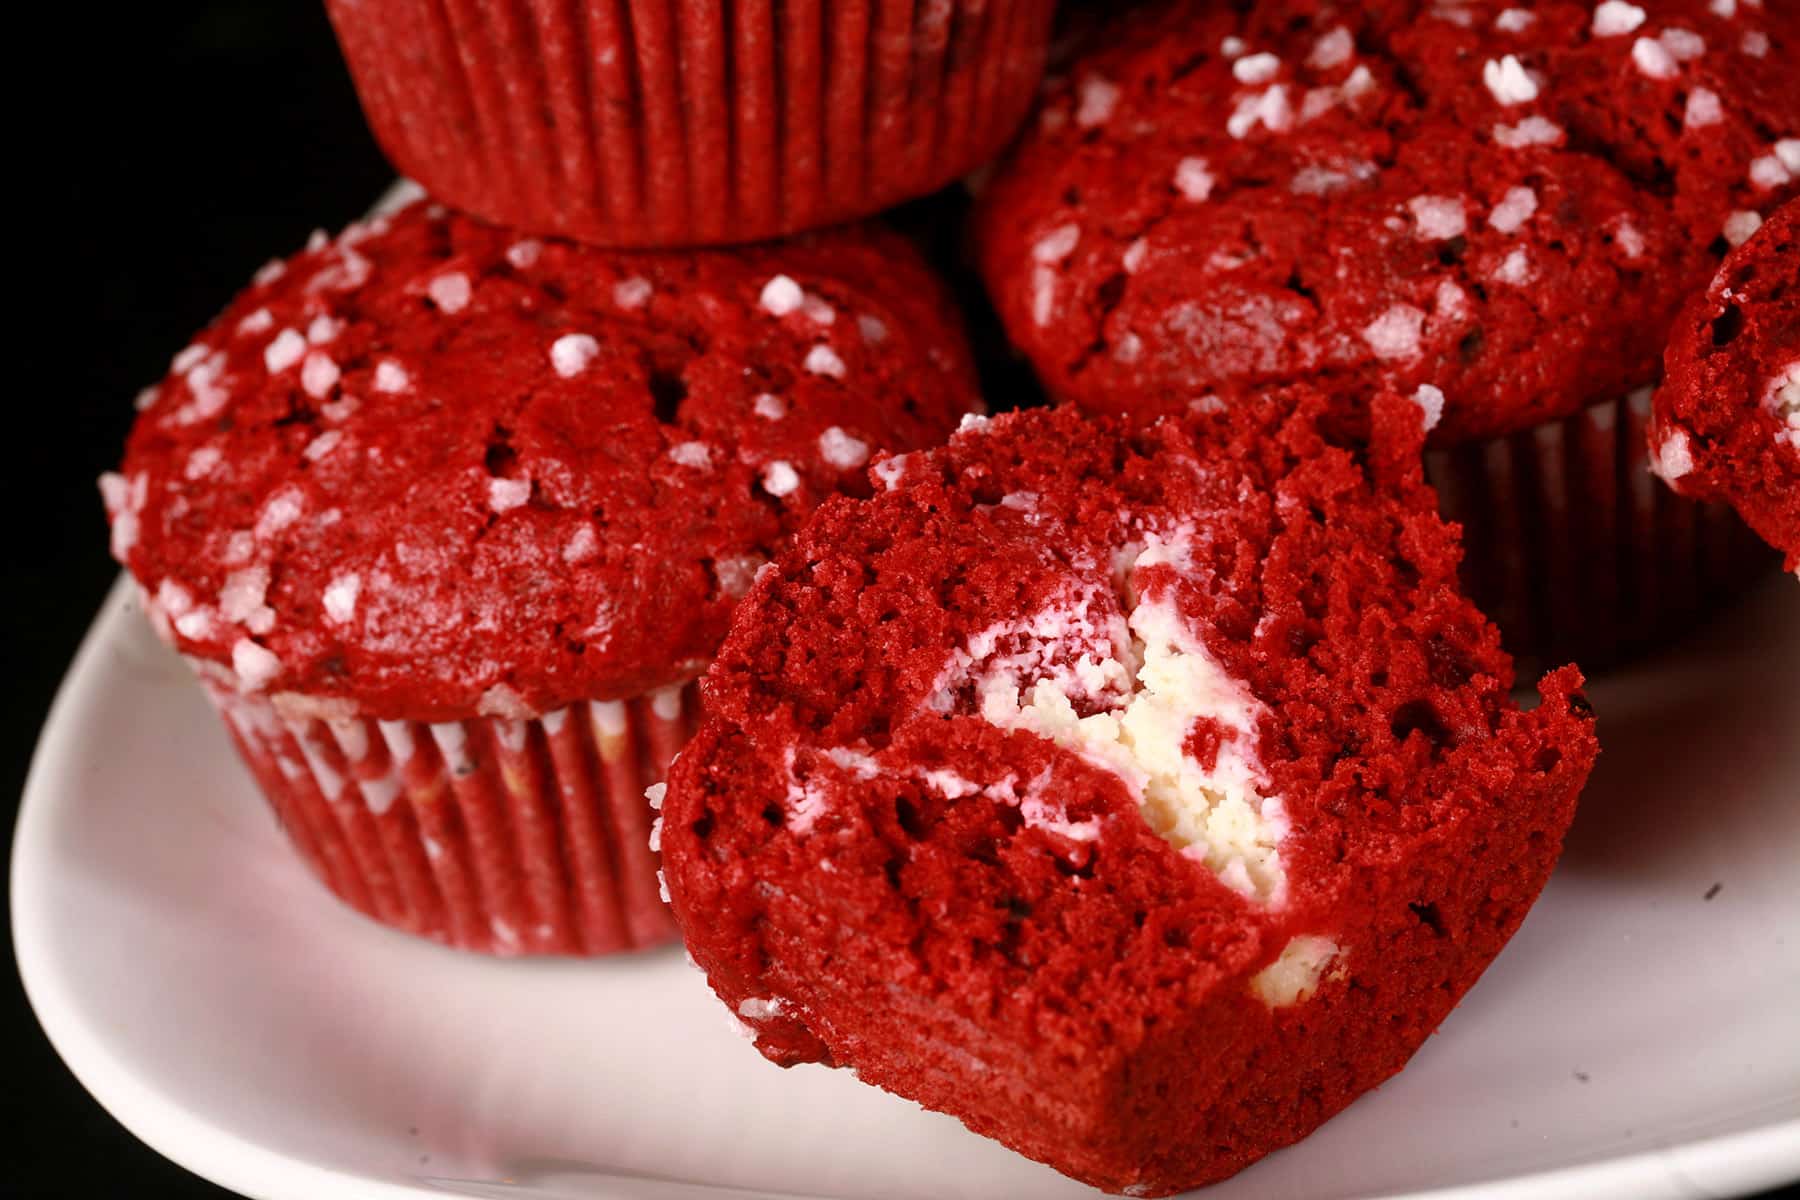 A cut open red velvet muffin with cream cheese filling, with more red velvet muffins behind it.